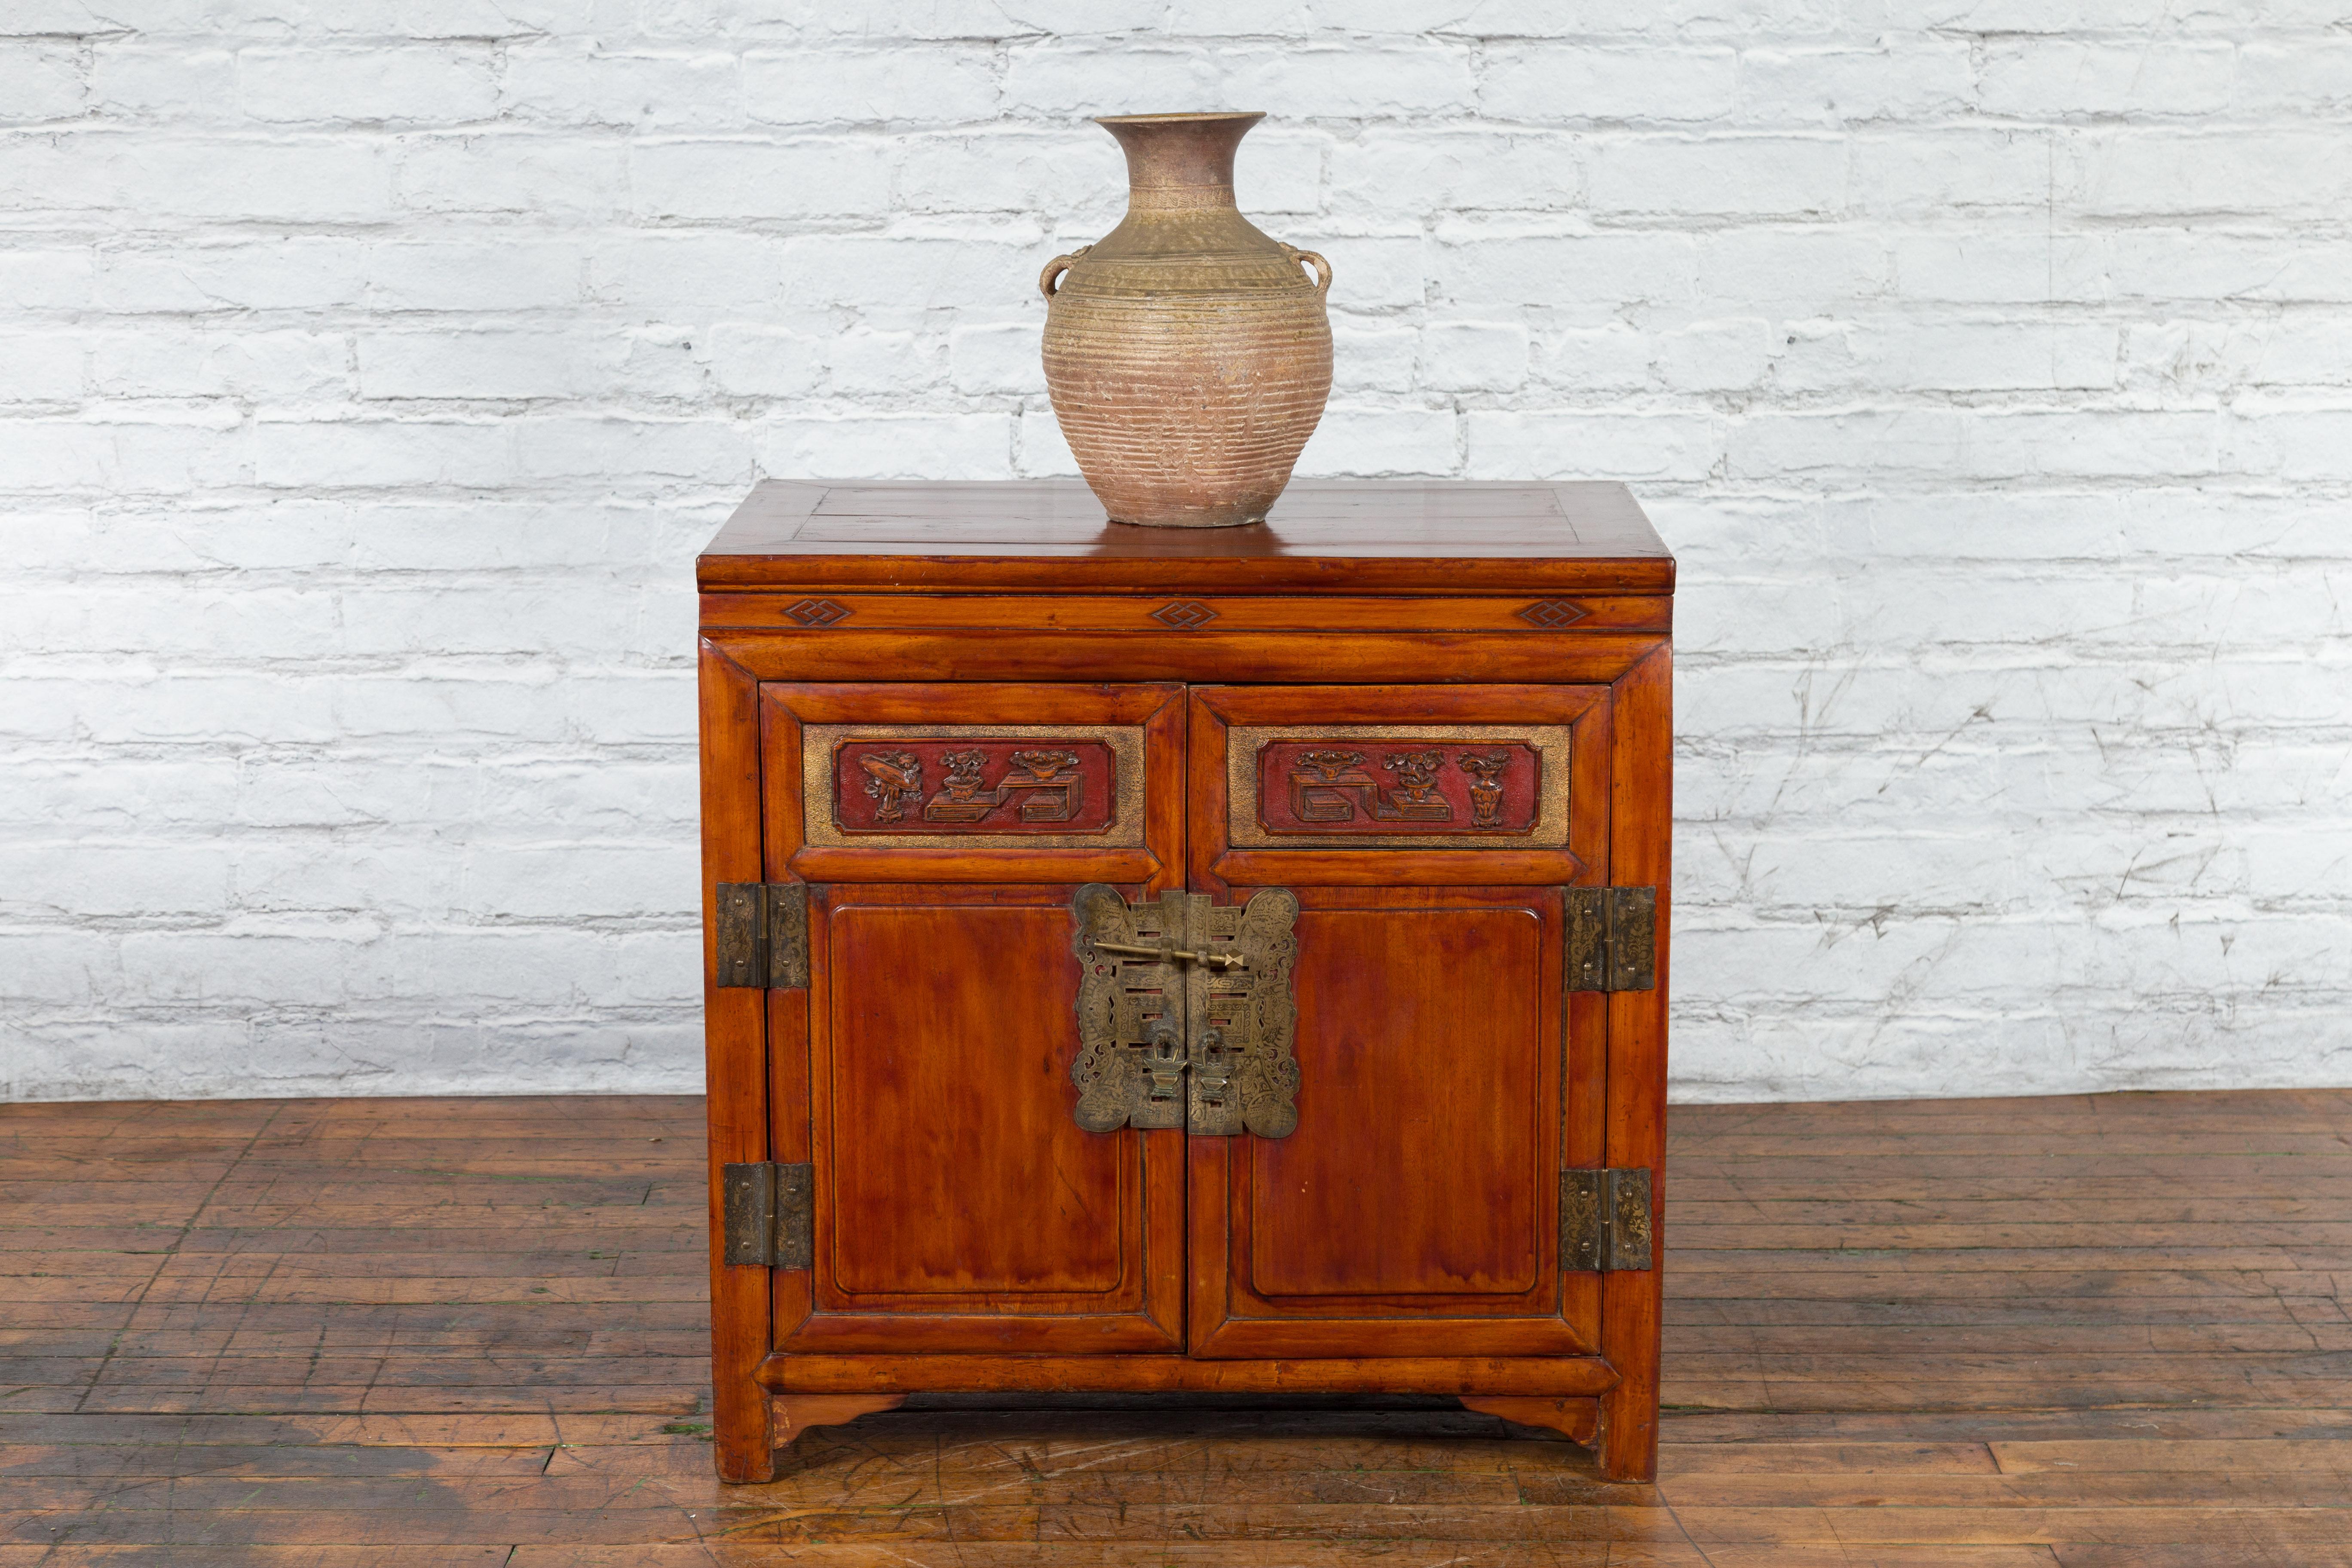 A Chinese antique side cabinet from the early 20th century with brown lacquer, carved panels, gilded accents, hidden drawers and brass hardware. Created in China during the early years of the 20th century, this side cabinet features a rectangular